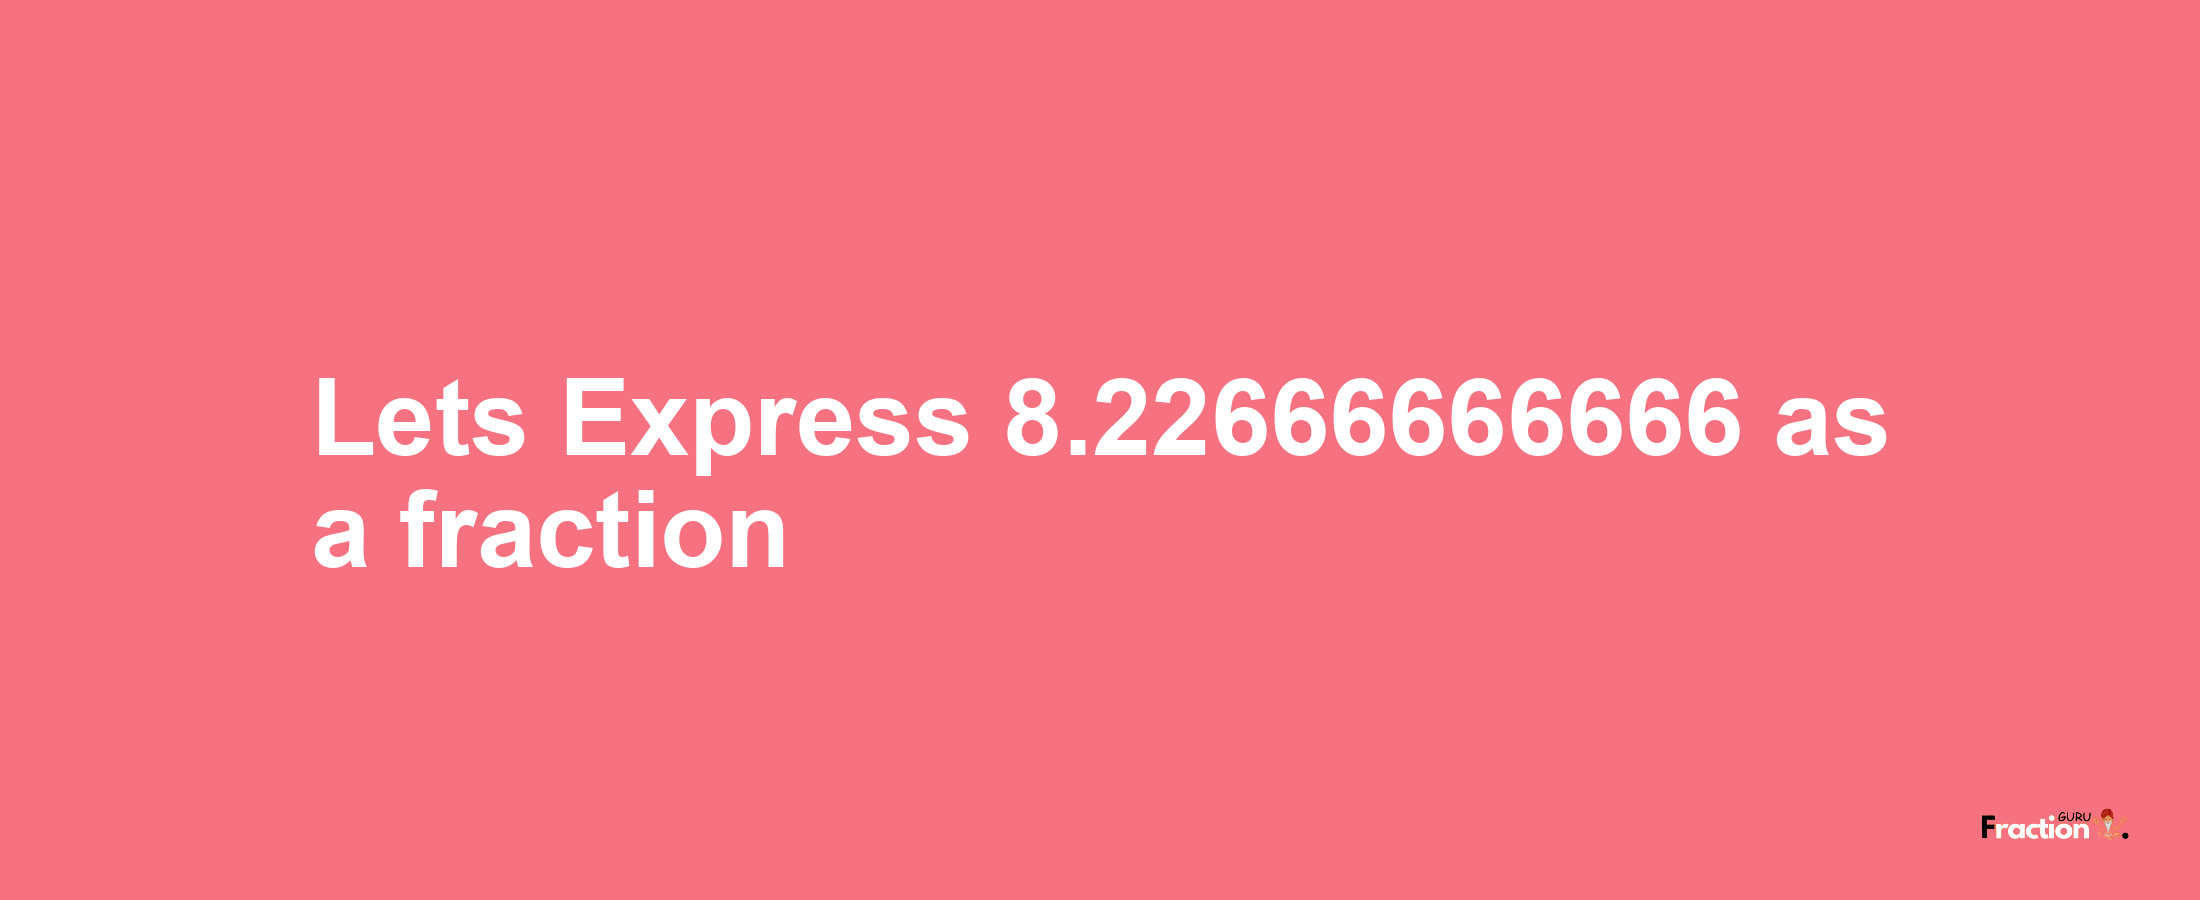 Lets Express 8.22666666666 as afraction